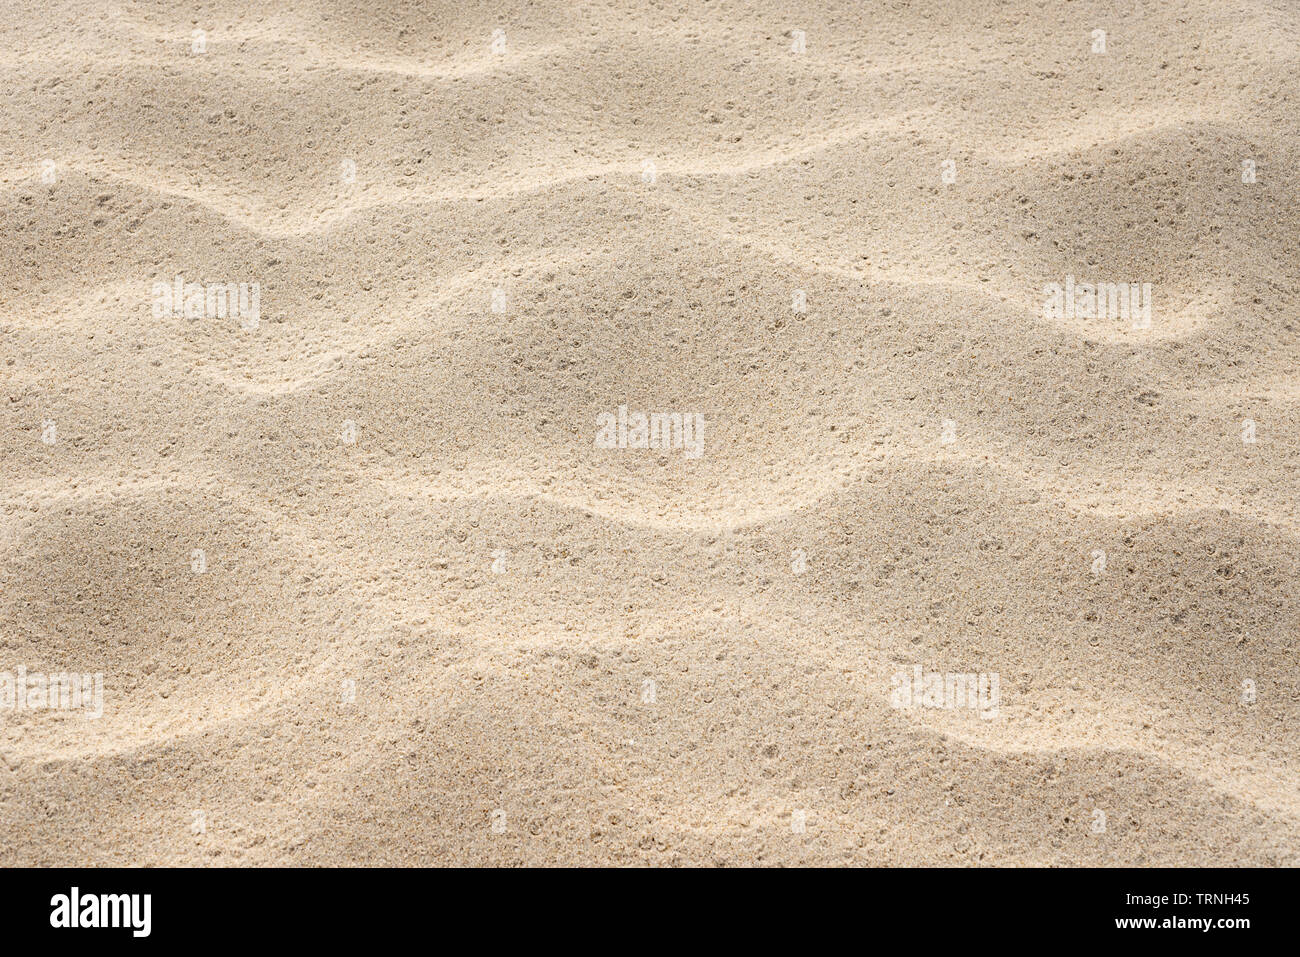 Summer background for design. Abstraction in nature. The texture of the sandy beach with a wavy surface Stock Photo